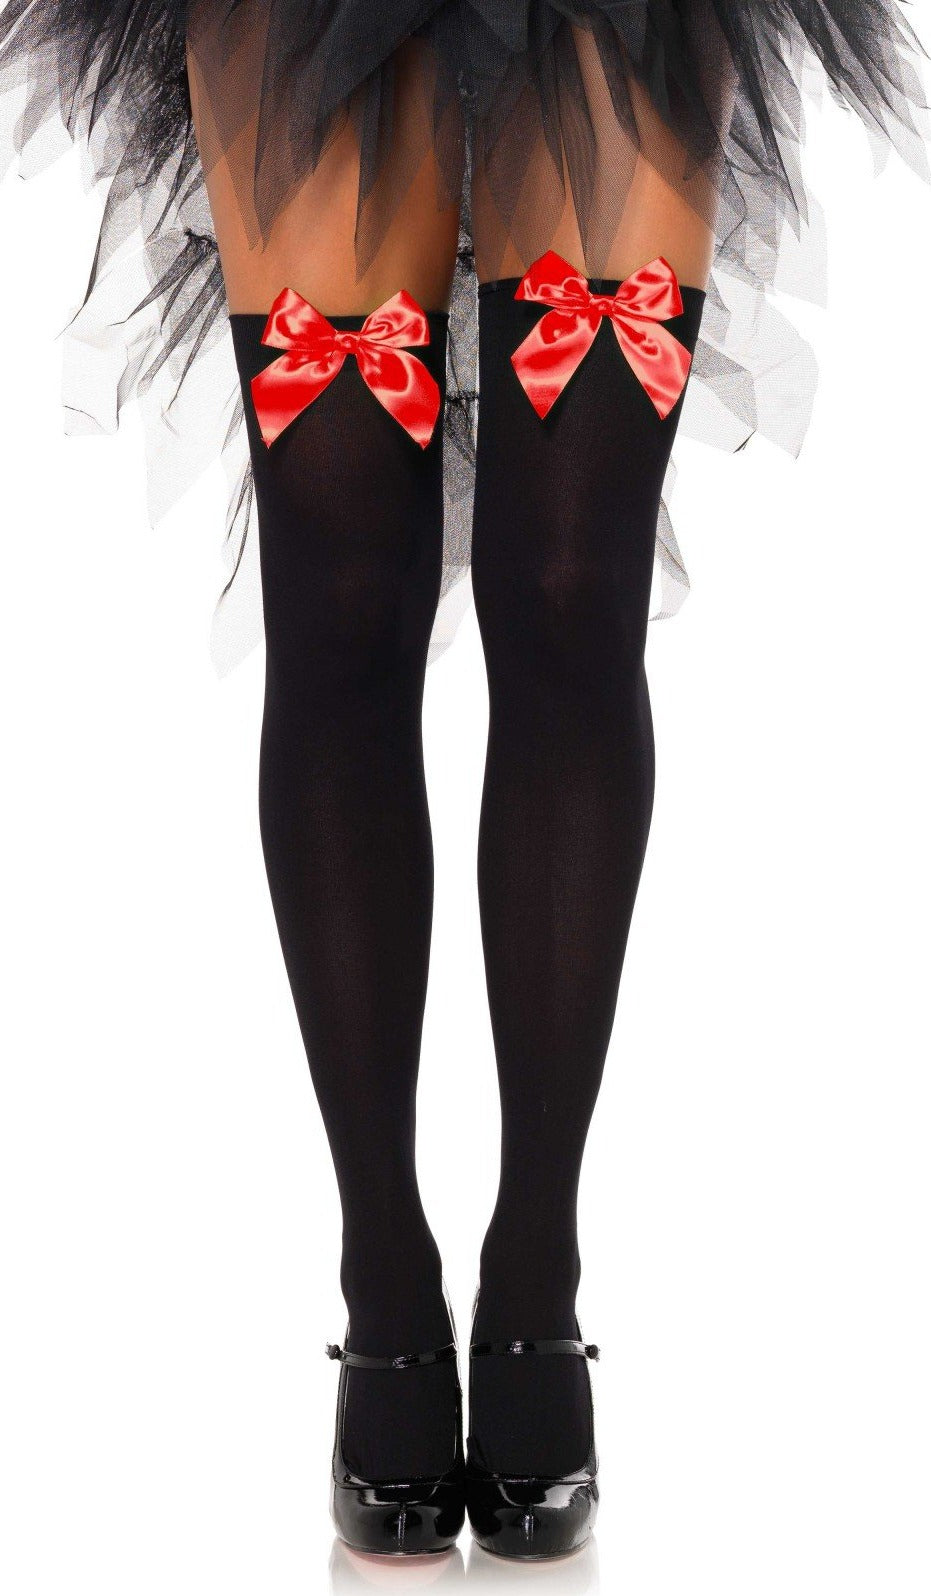 Leg Avenue 6255 Bow Stockings - black opaque thigh high socks with red satin bow